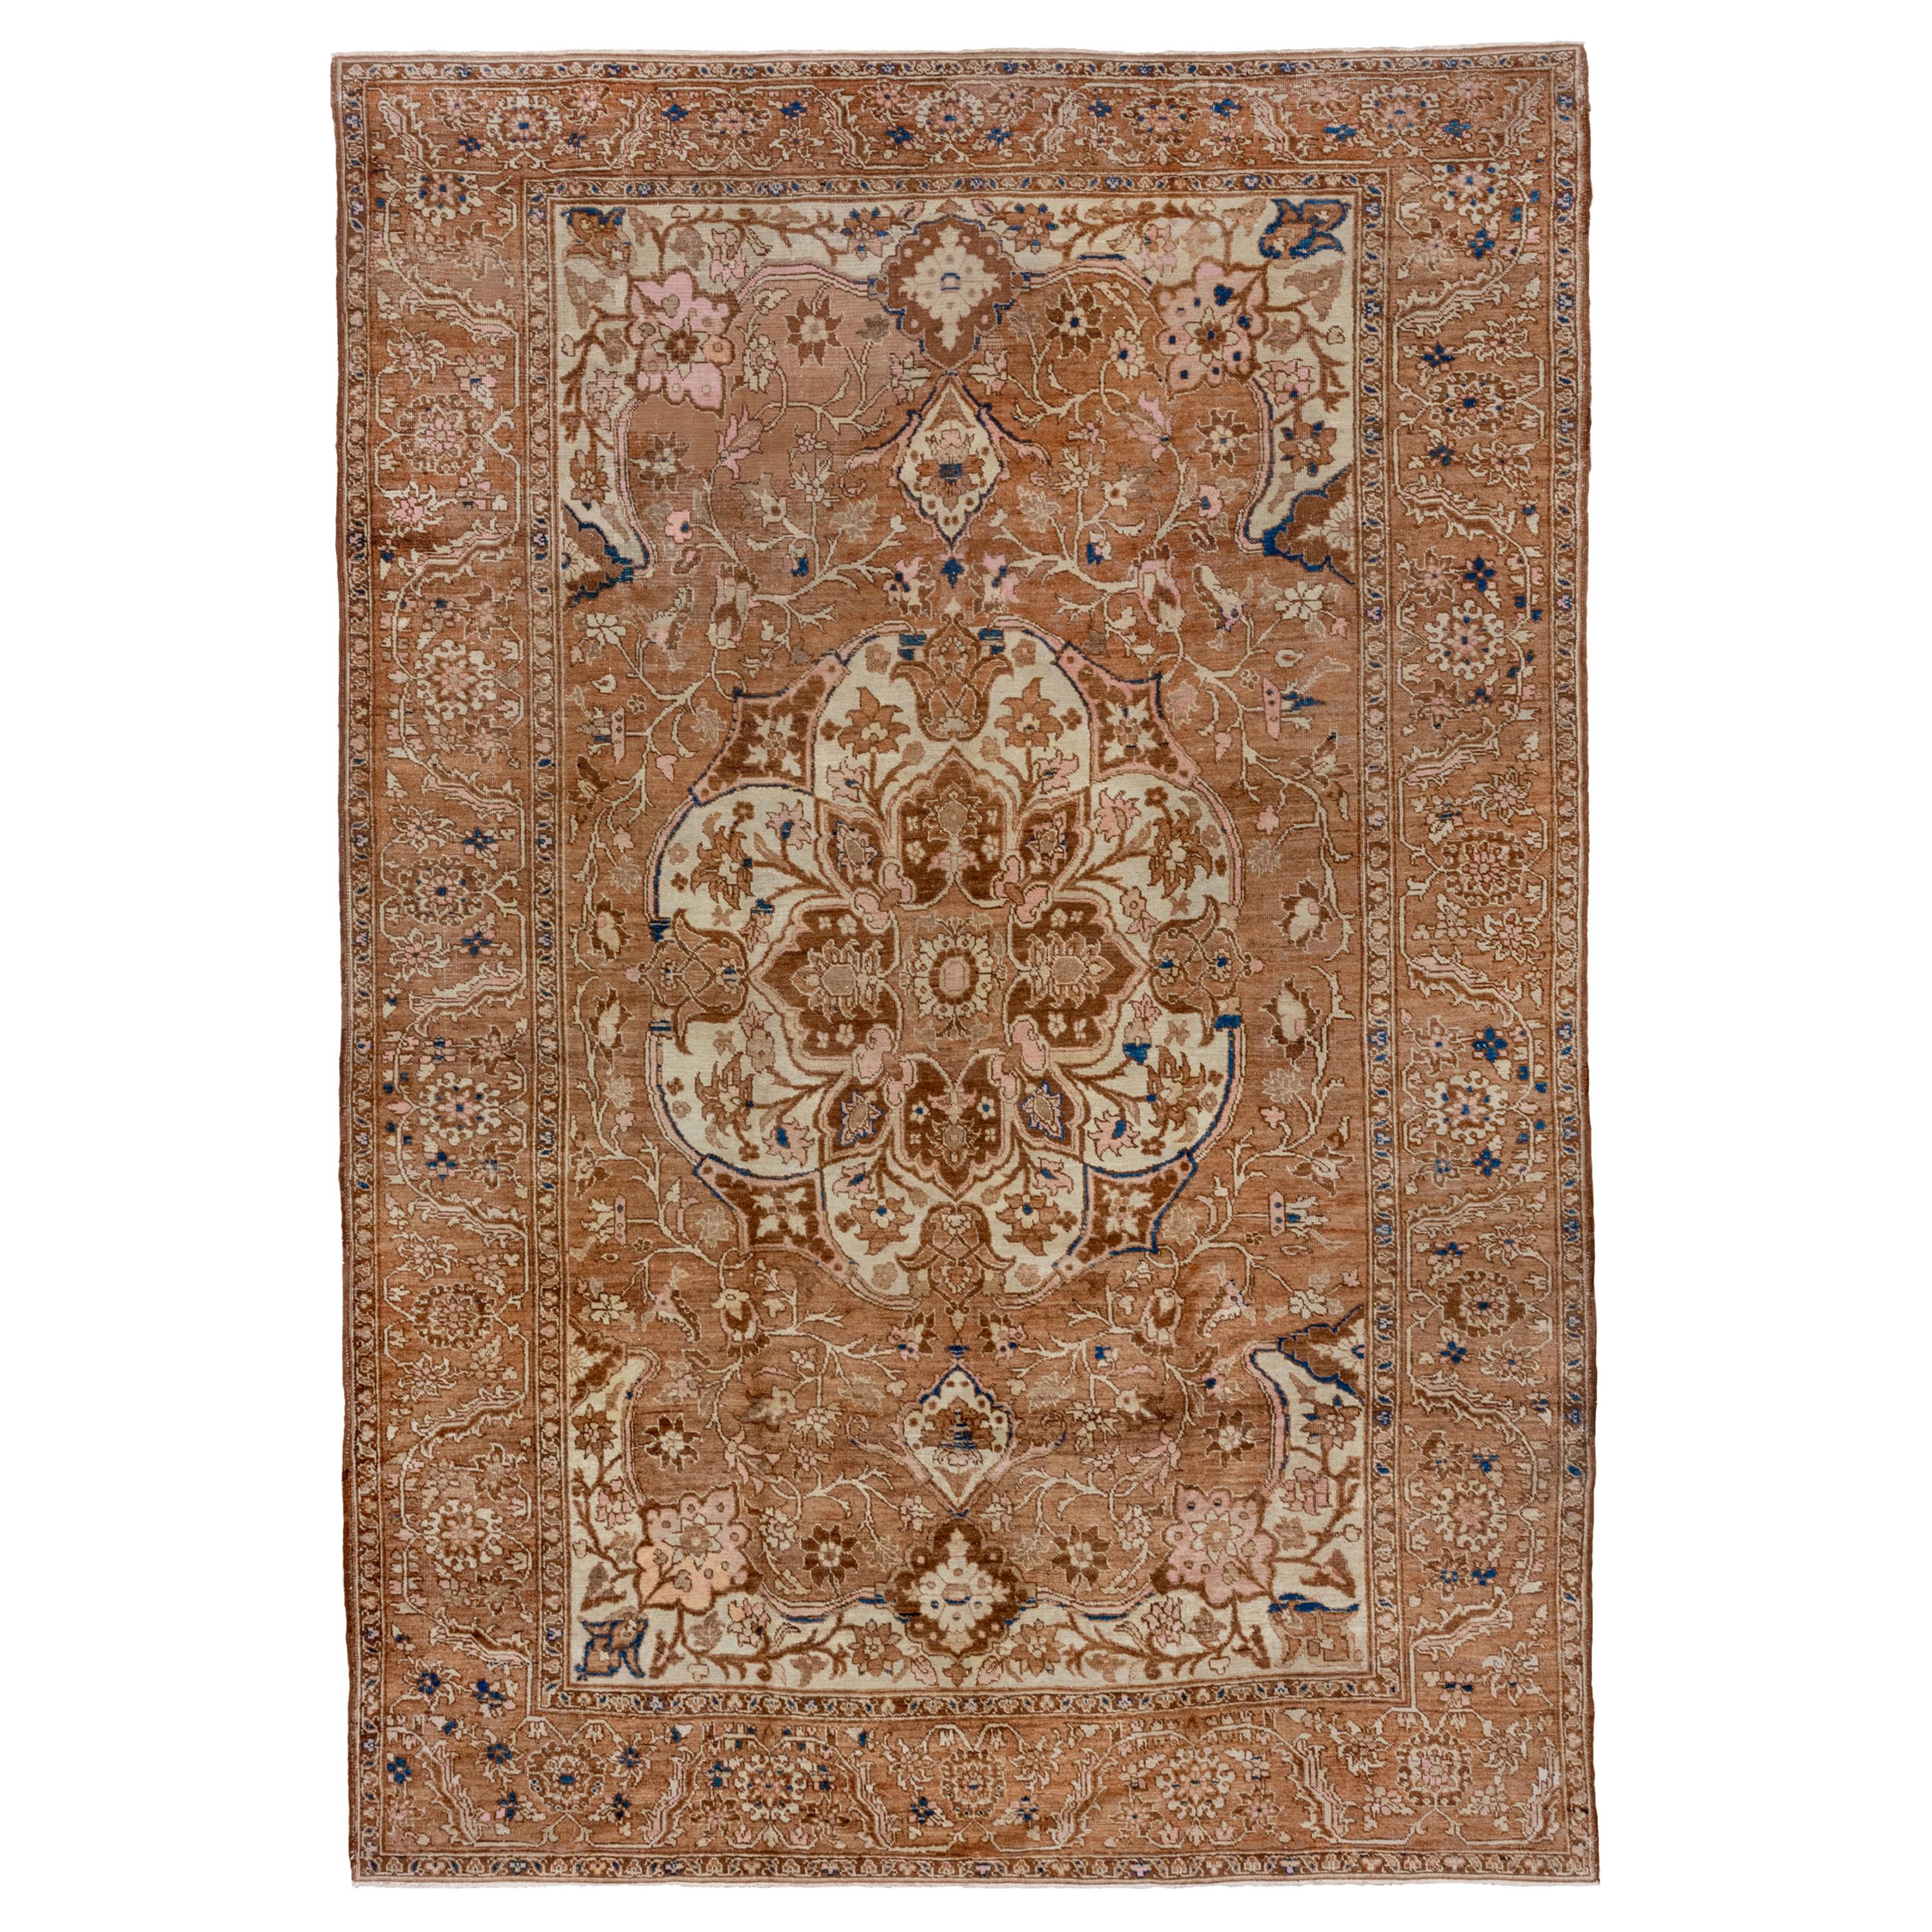 Antique Persian Heriz Serapi Rug, Tan Field with Blue & Pink Accents, Circa 1910